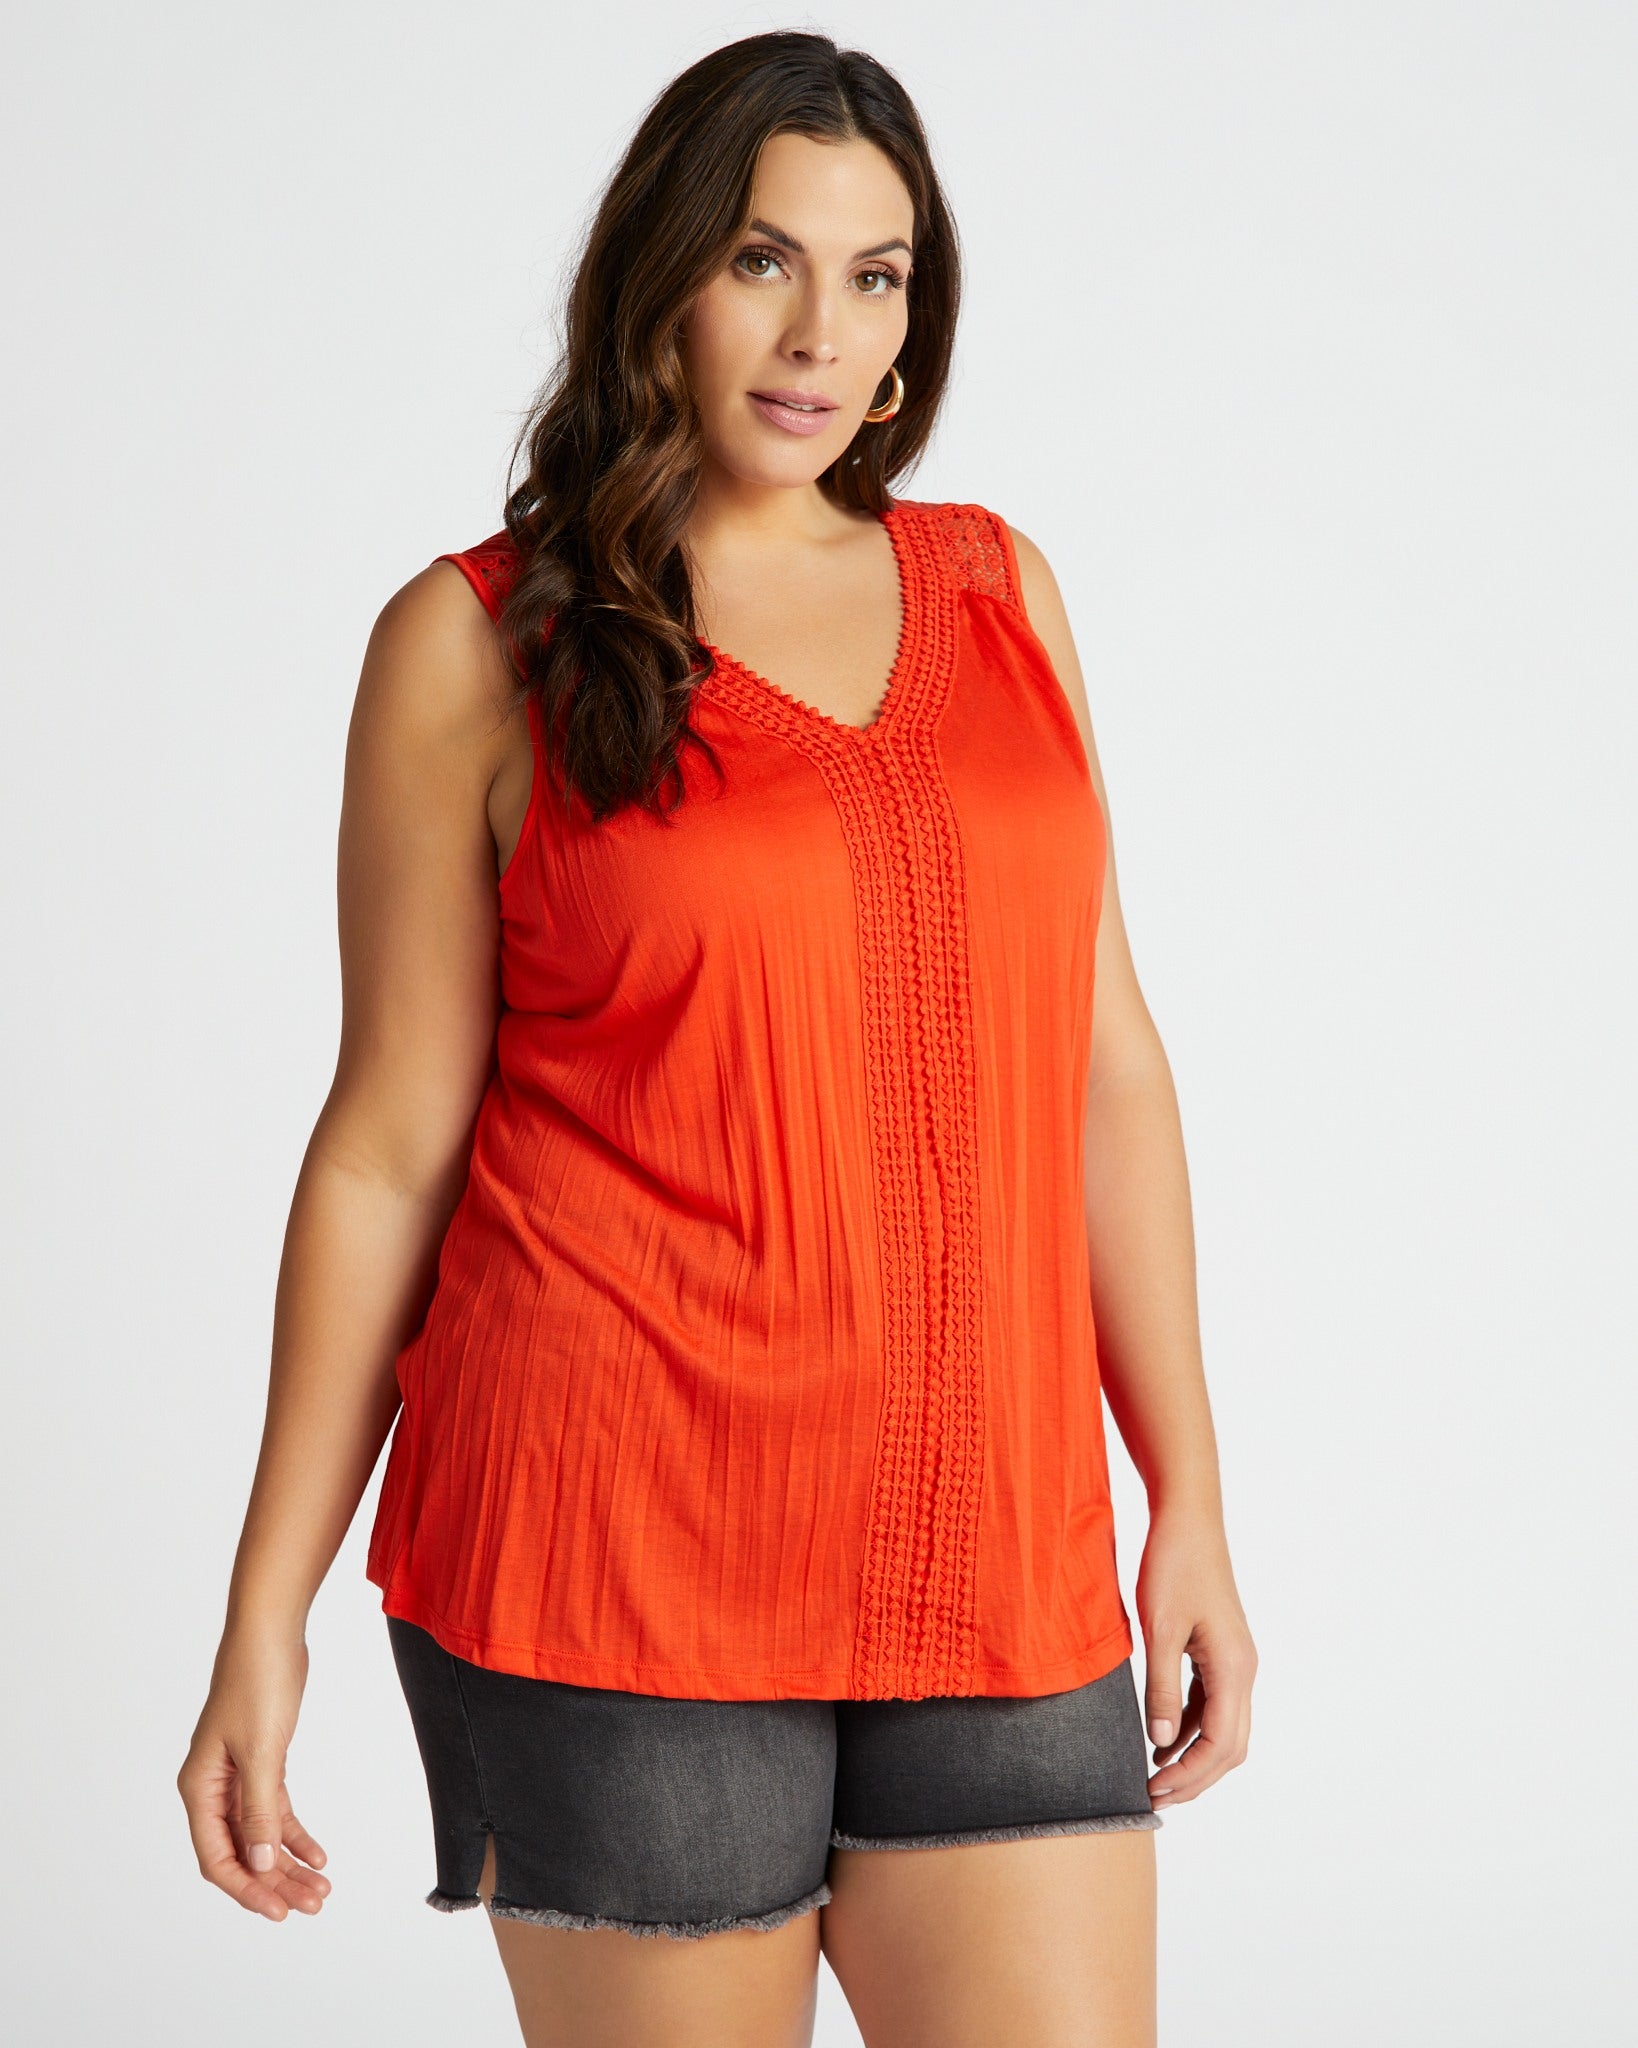 S/L Crinkle Top withCrochet Trim in Plus